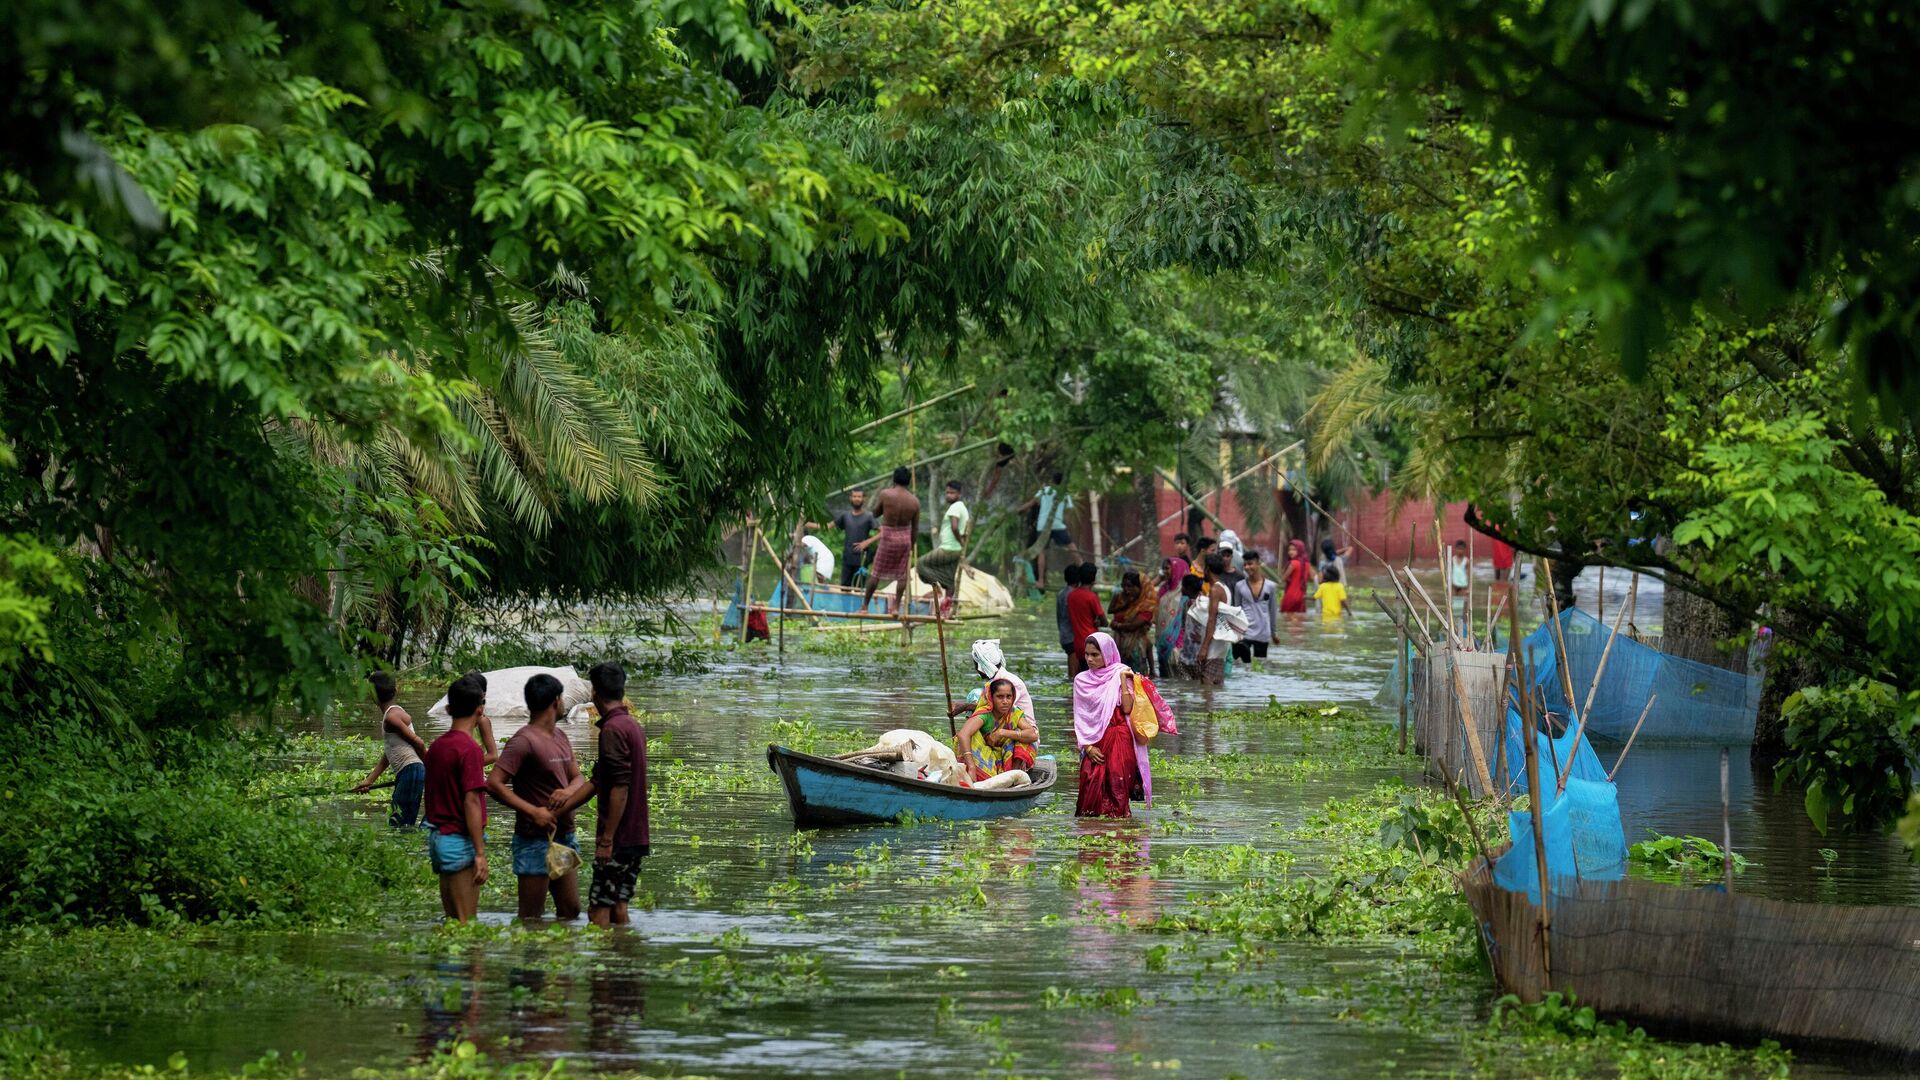 Flood-affected people move towards safer grounds from marooned Tarabari village, west of Gauhati, in the northeastern Indian state of Assam, Monday, June 20, 2022 - Sputnik International, 1920, 22.06.2022